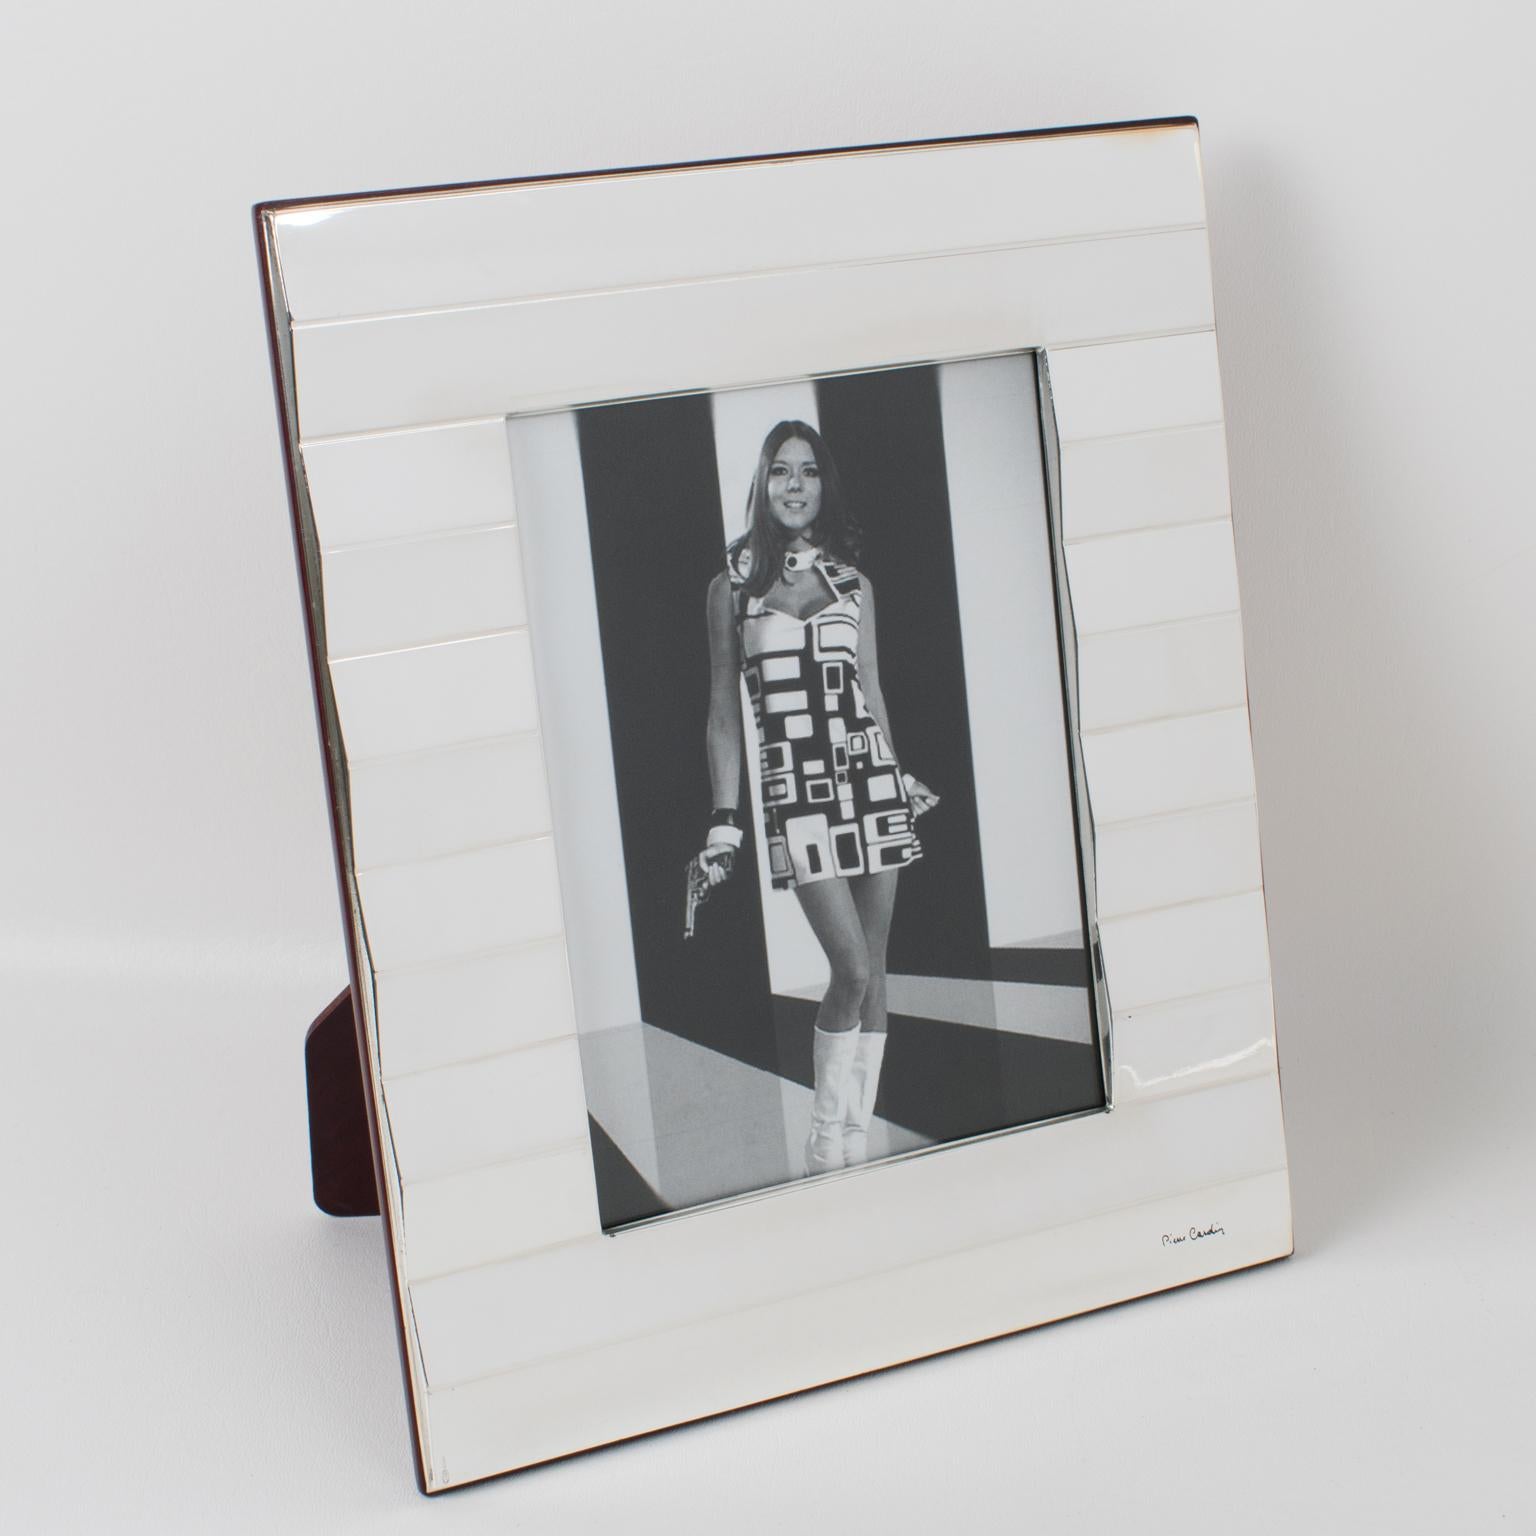 A charming Pierre Cardin (1922 - 2020) Paris silverplate picture photo frame. Geometric shape with a large striped pattern all around. Back and easel in lacquered wood. Engraved on the front is the 